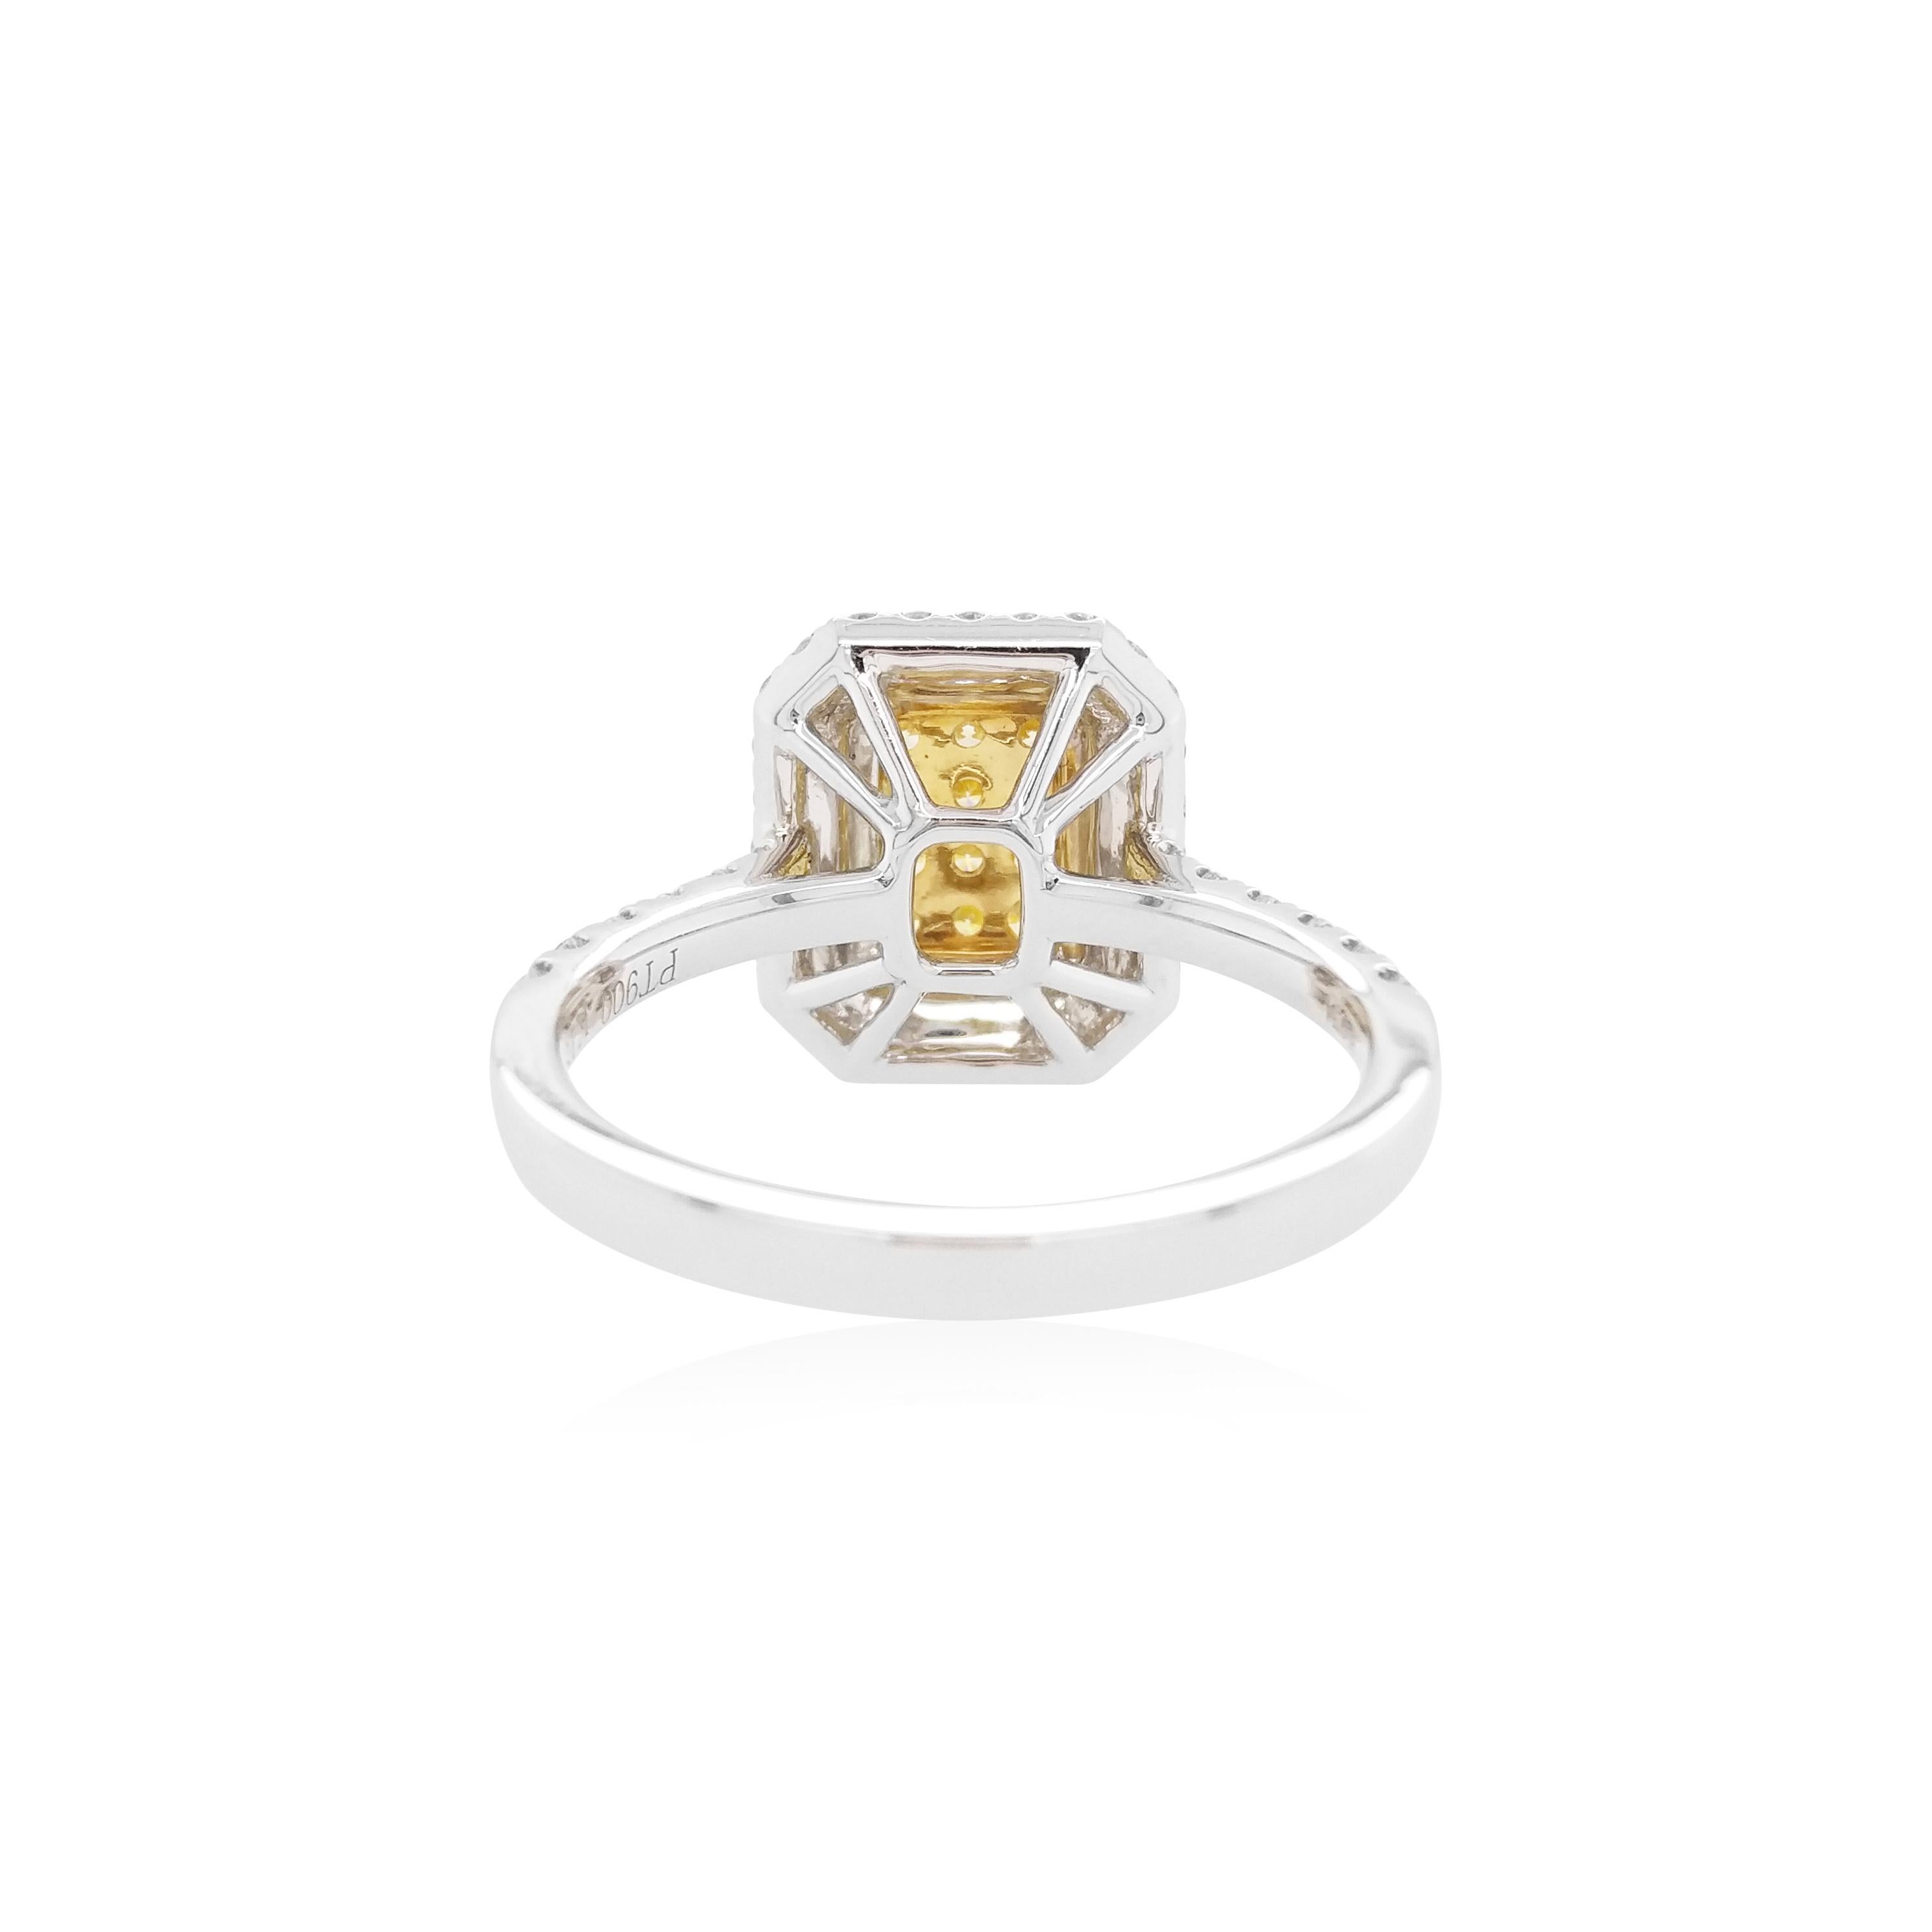 This elegant ring features lustrous natural Yellow diamonds at the centre of the design, surrounded by halos of scintillating white diamonds. The rich colour of these diamonds is complimented perfectly by the delicate platinum and 18 Karat Yellow